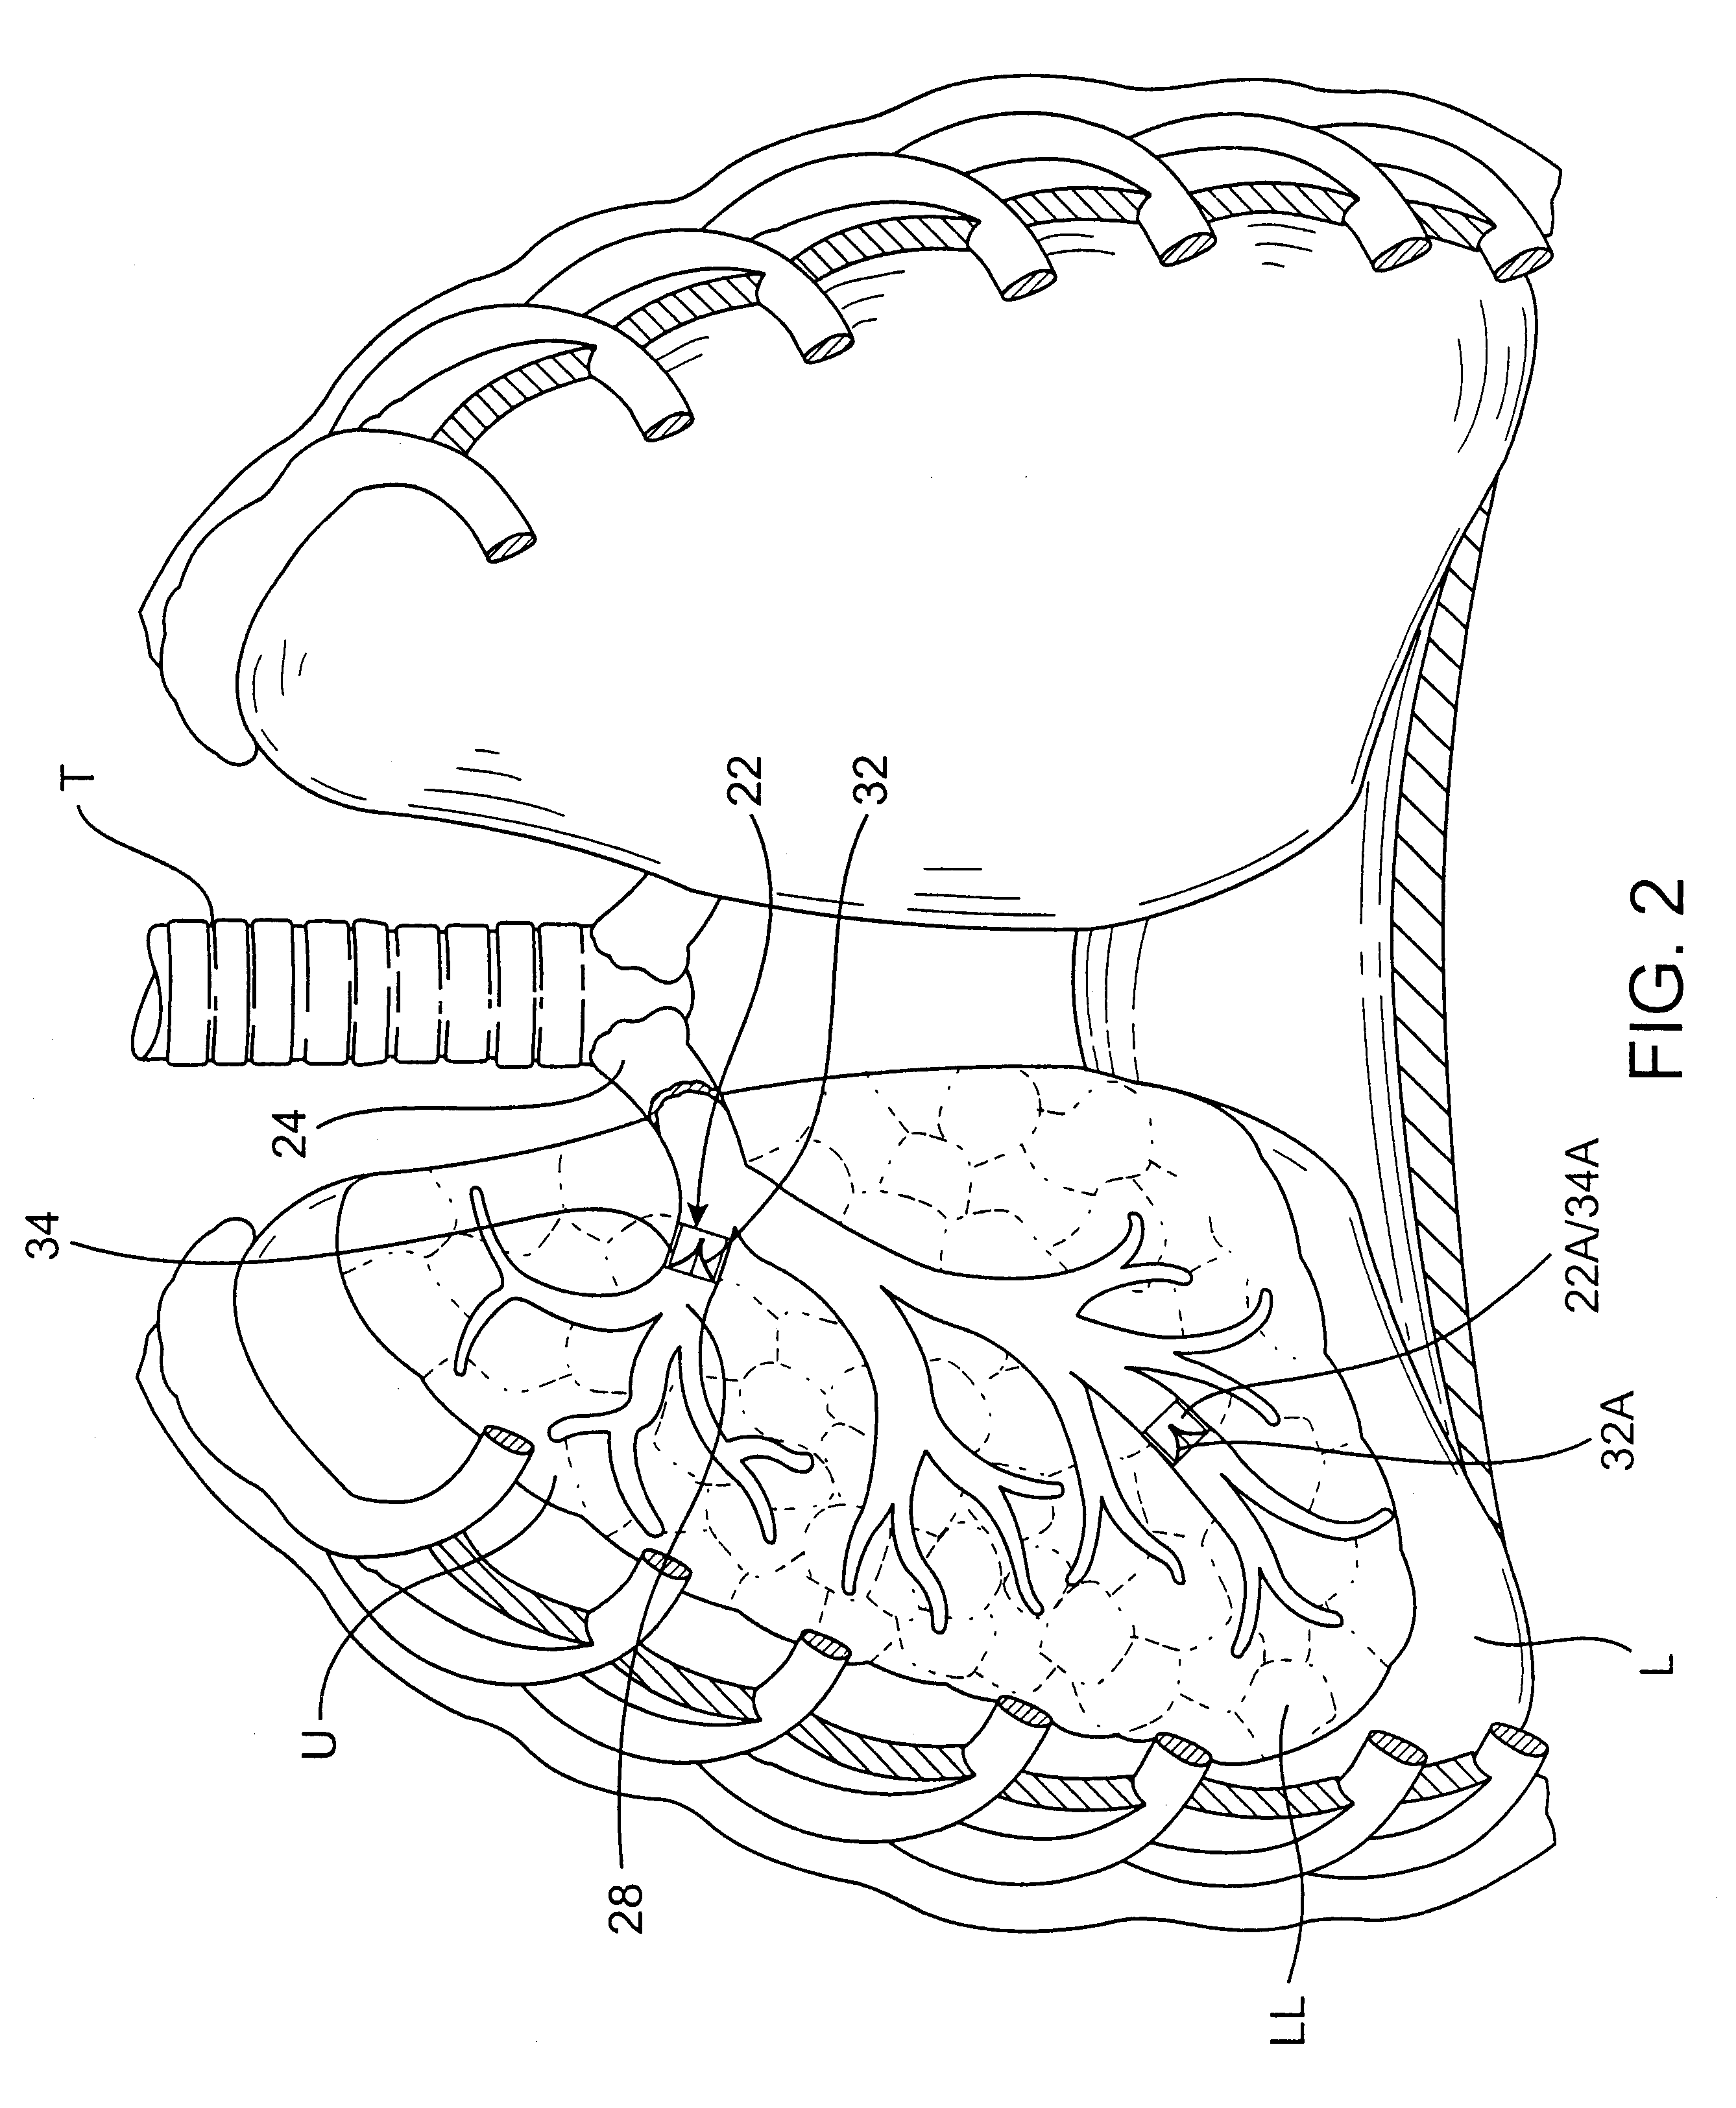 Methods and devices for use in performing pulmonary procedures